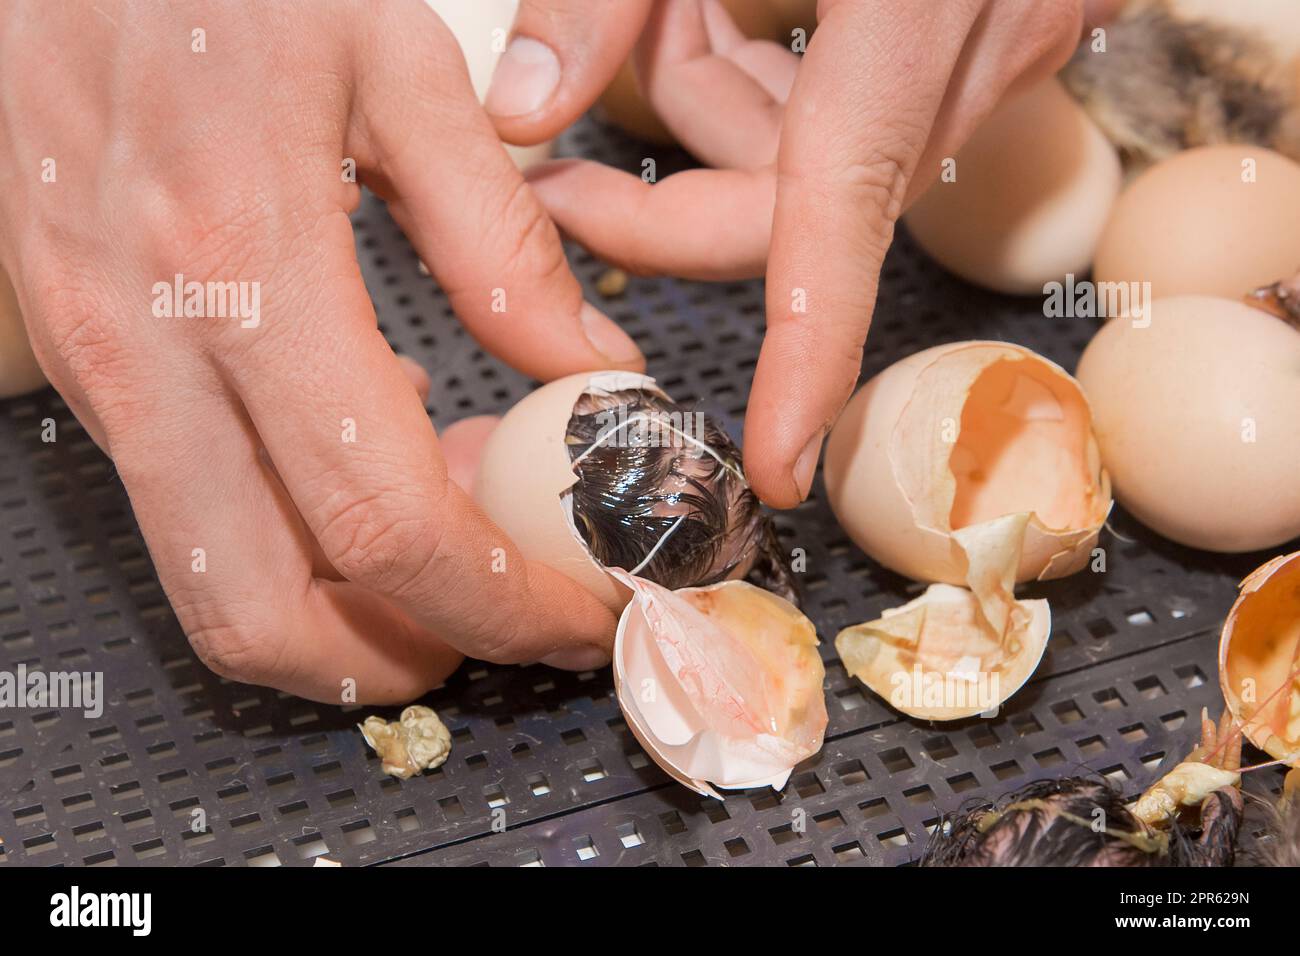 https://c8.alamy.com/comp/2PR629N/farmers-hand-close-up-finger-helps-to-hatch-a-newborn-chick-chicken-from-a-hatching-egg-in-an-incubator-poultry-farming-2PR629N.jpg